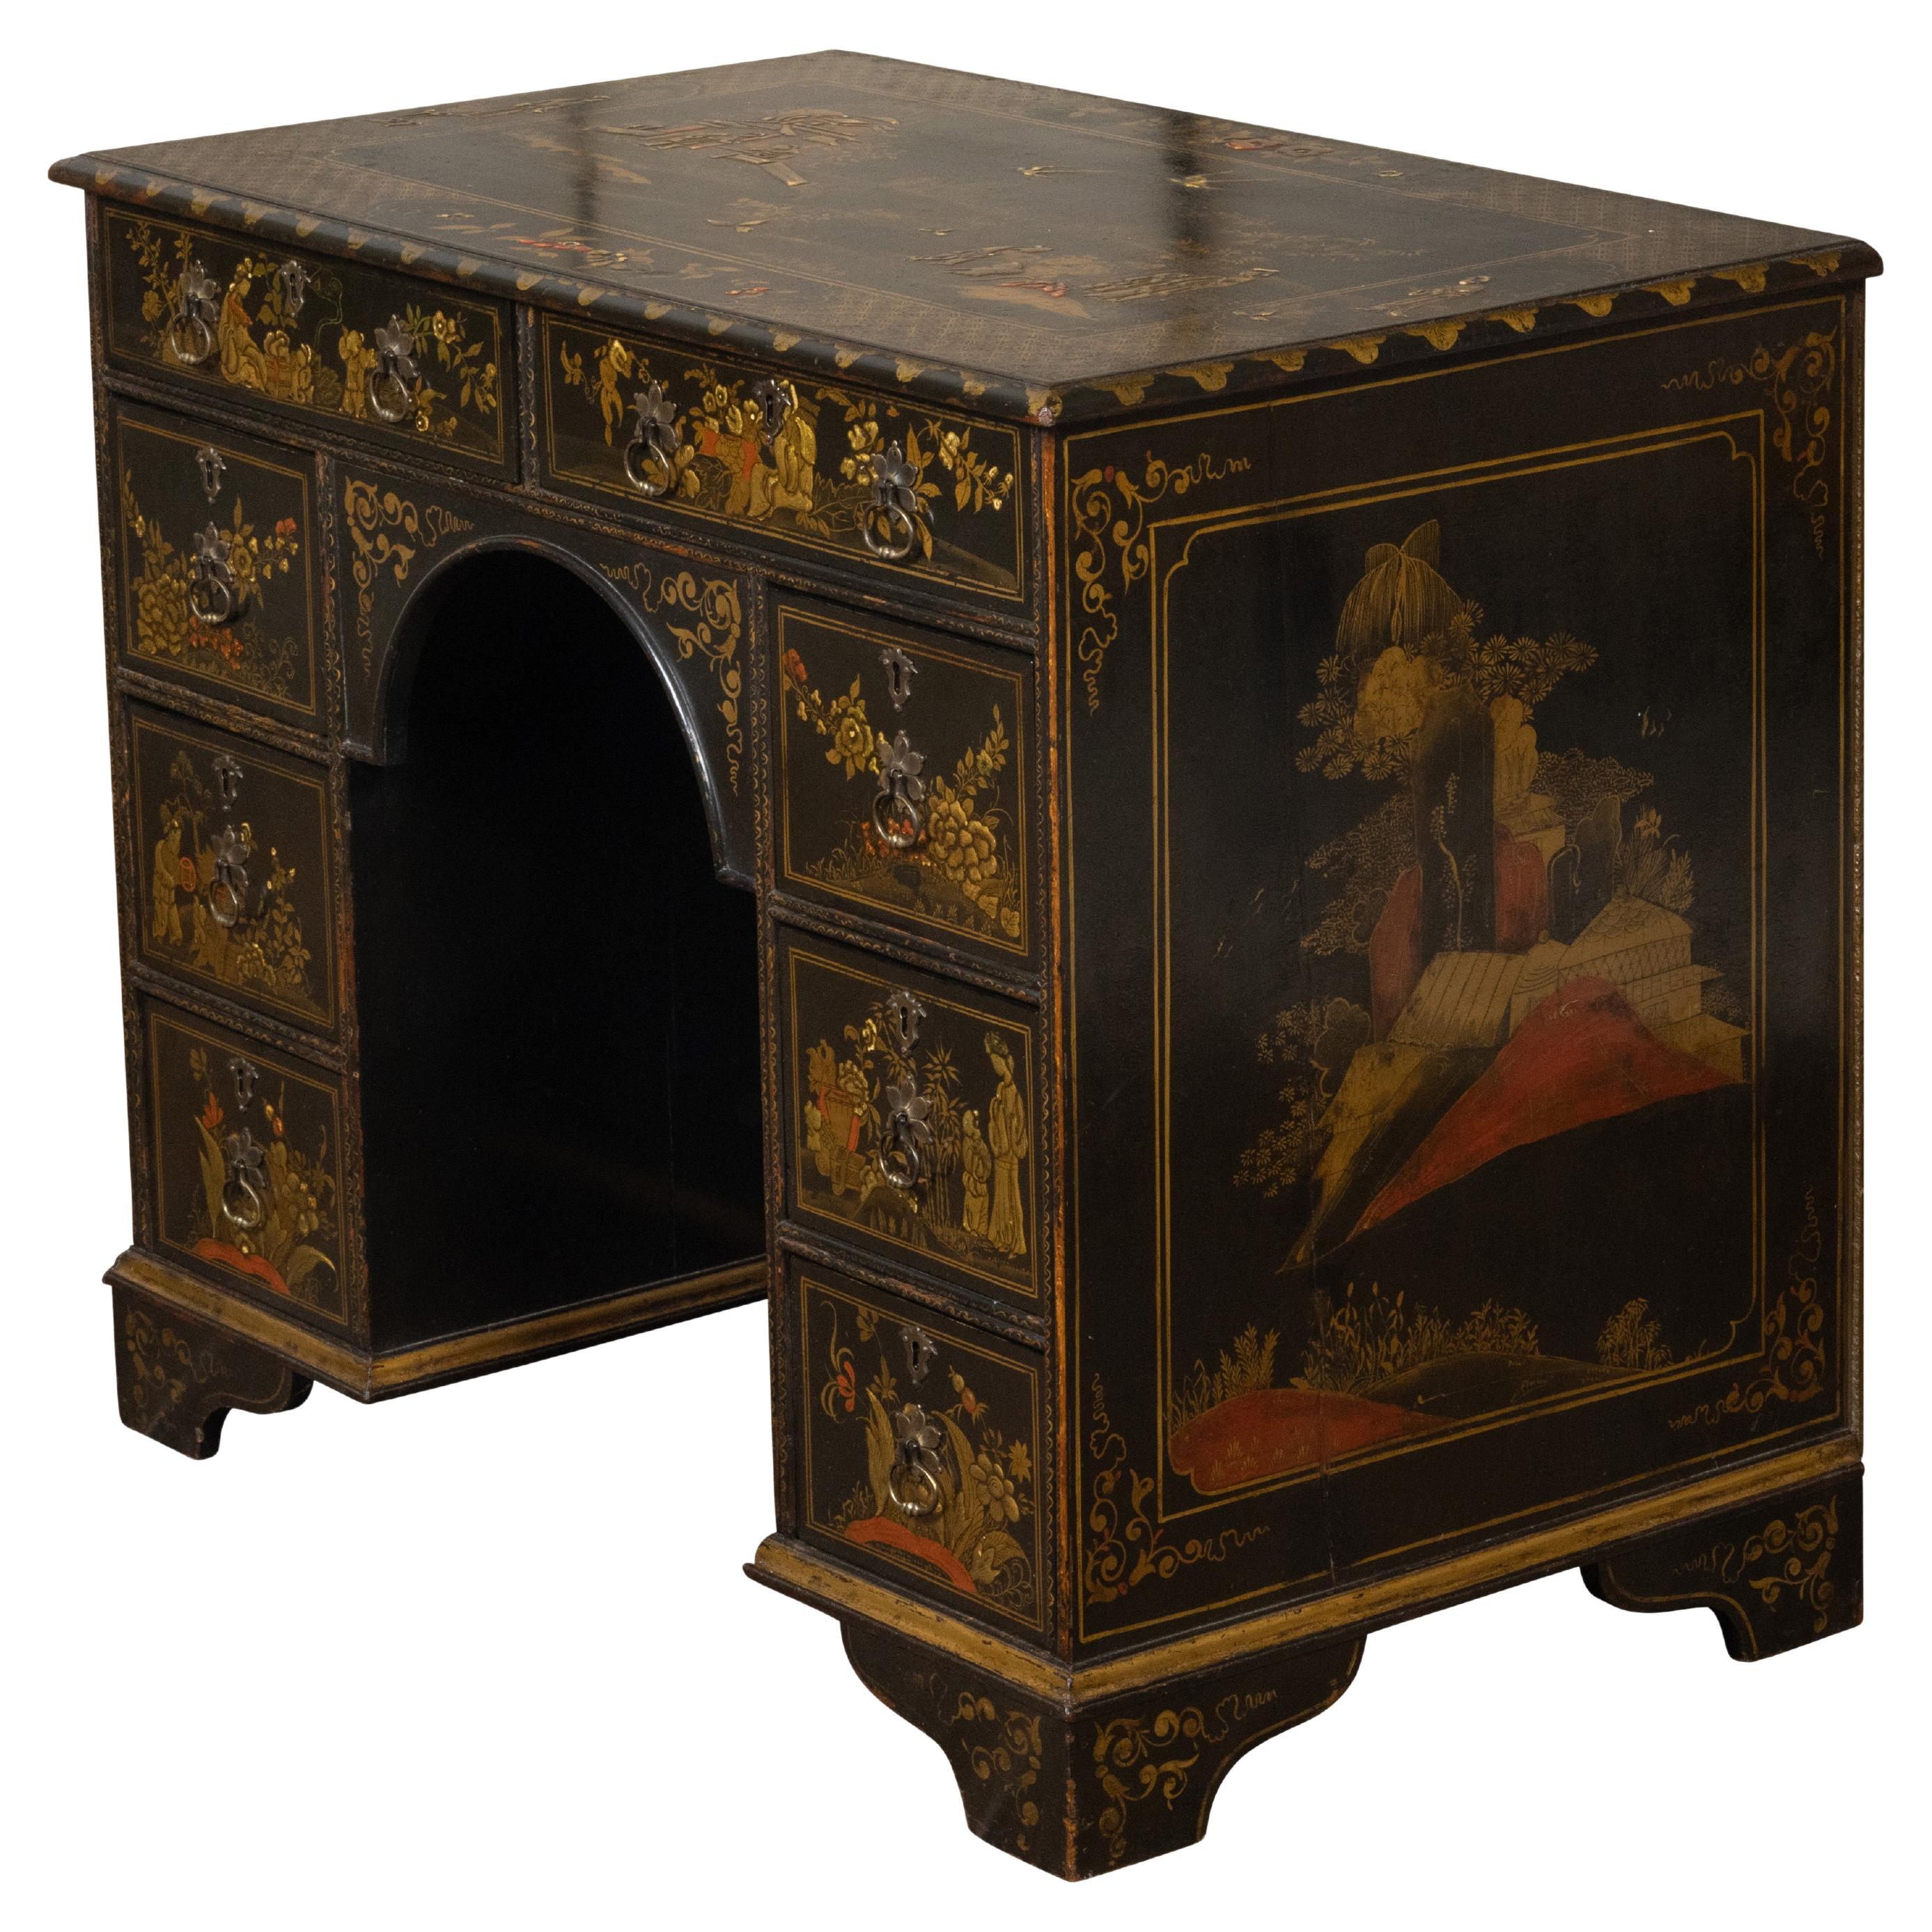 English 19th Century Japanned Desk with Black and Gold Chinoiserie Décor For Sale